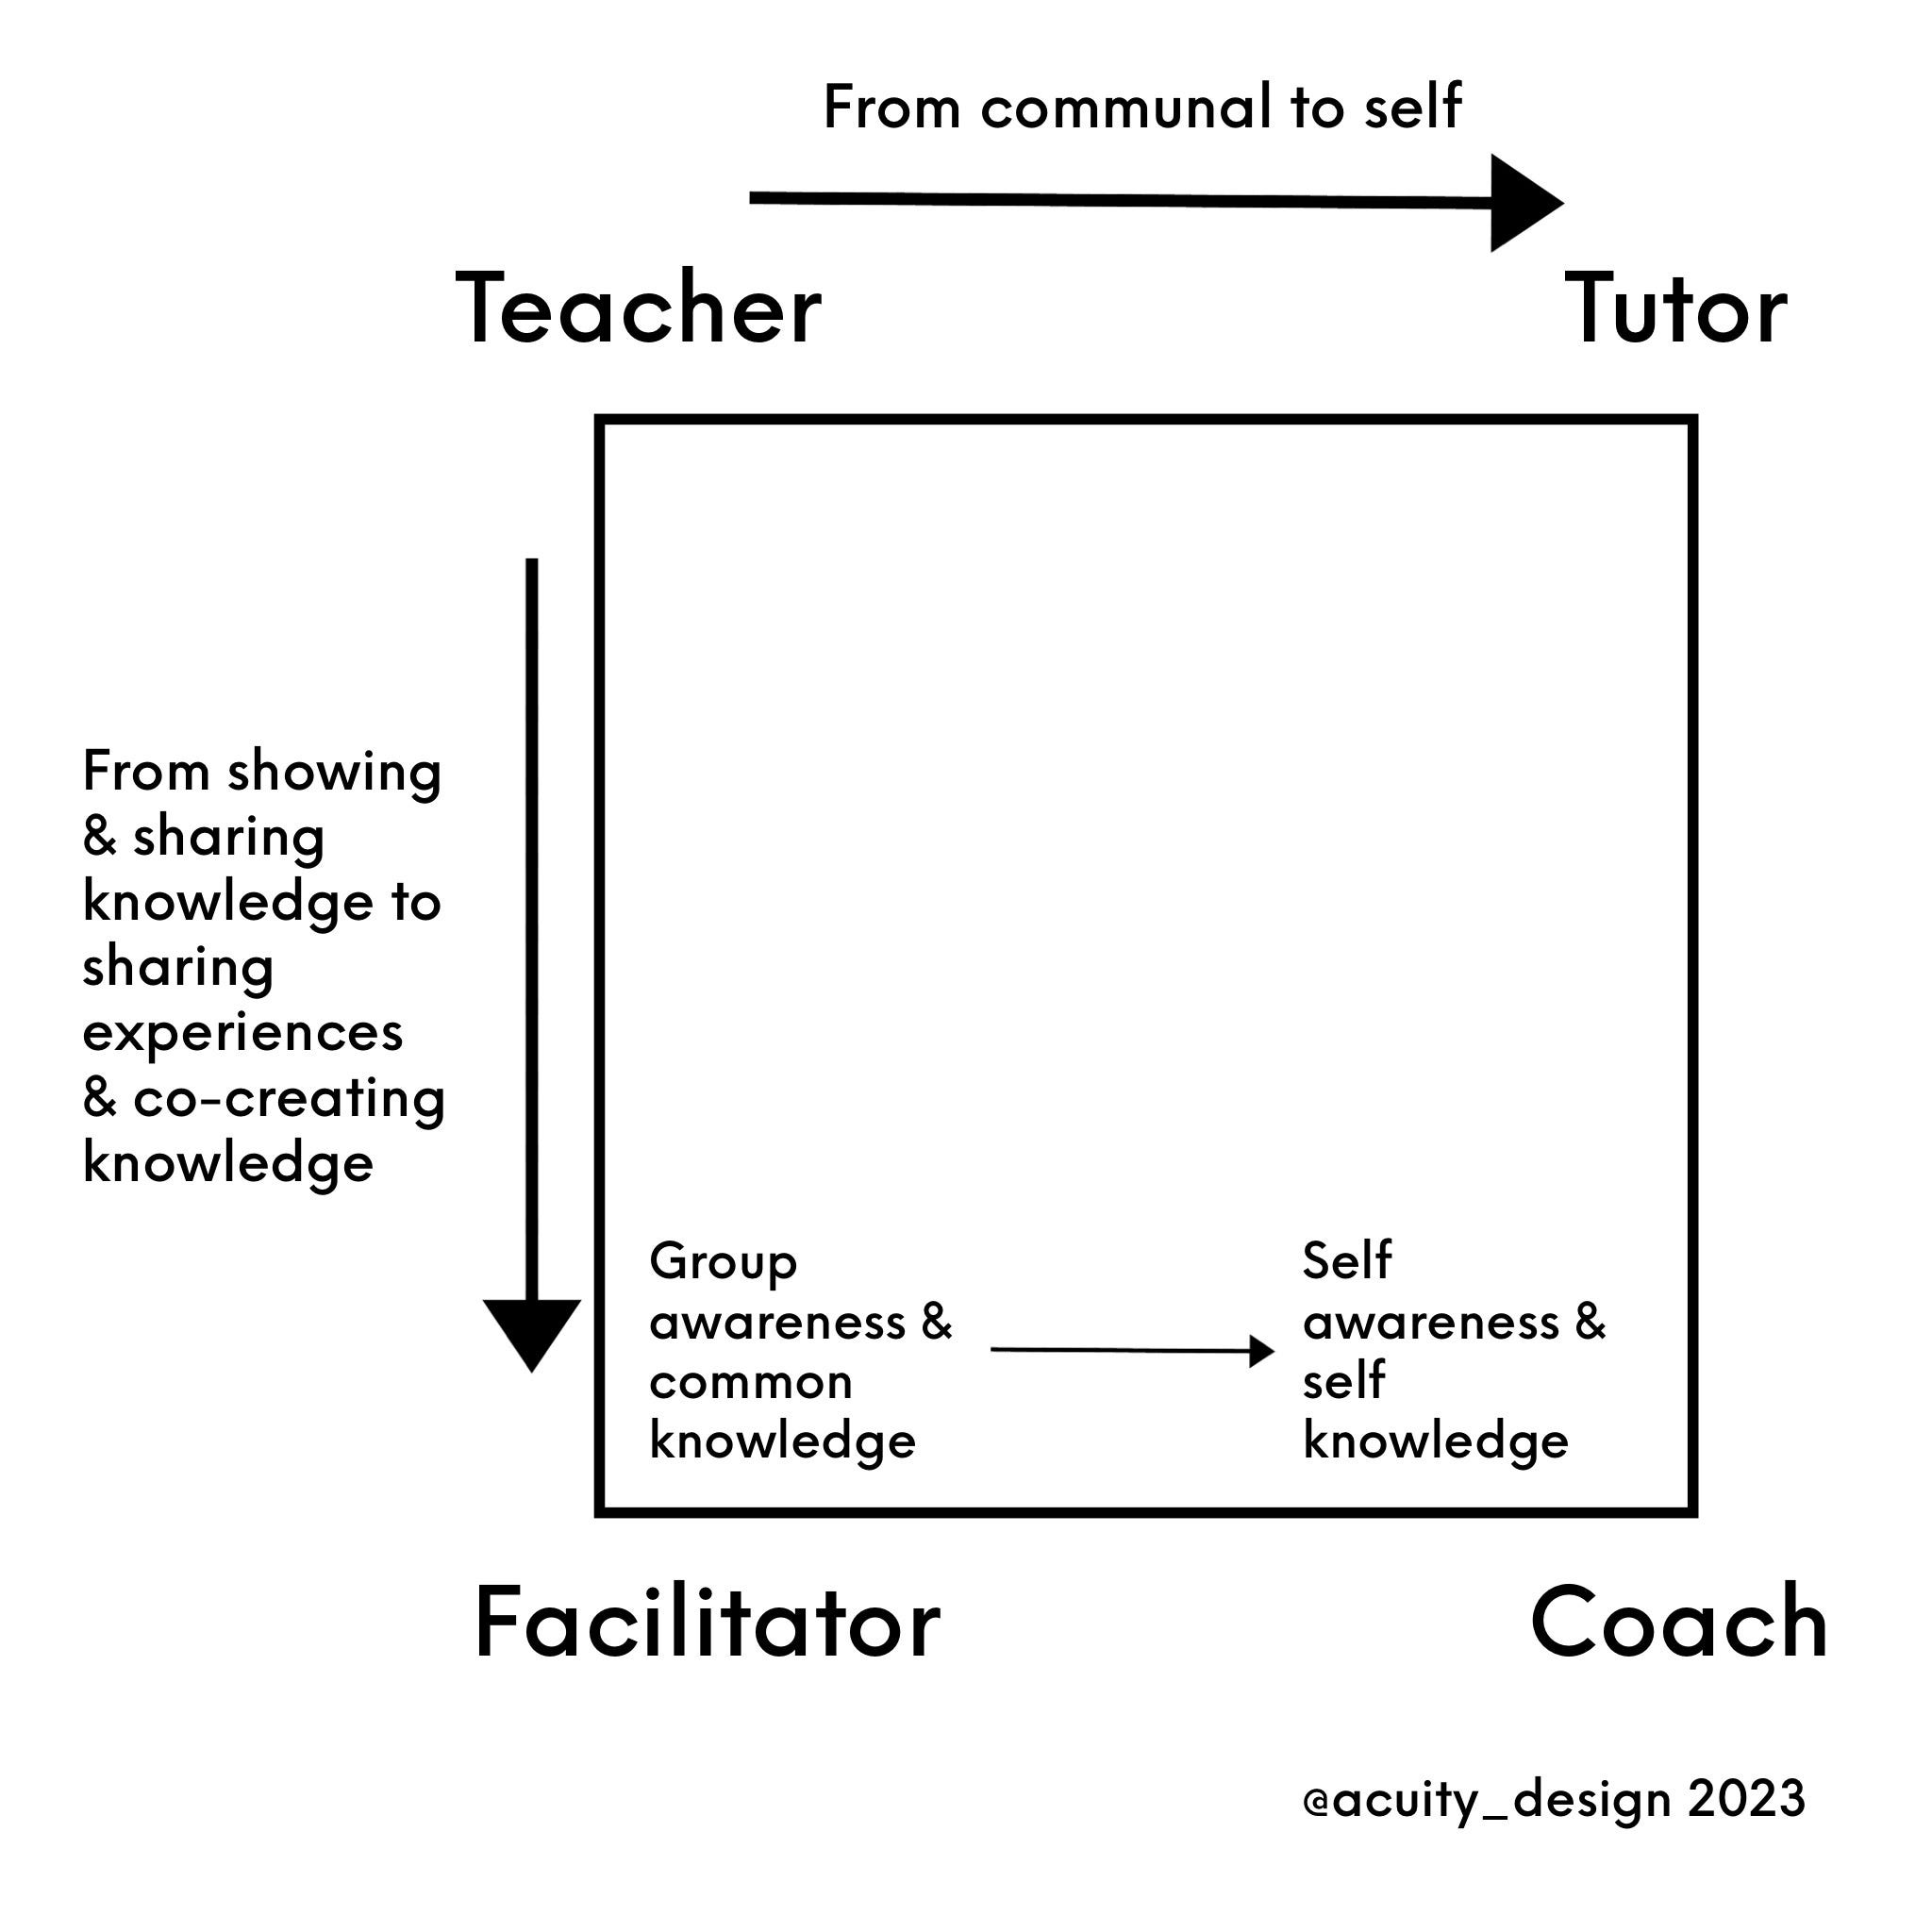 Diagram with roles like teacher, tutor, facilitator and coach at corners and shift from group to self as main shift from being taught knowledge in a group to discovering self-awareness in coaching